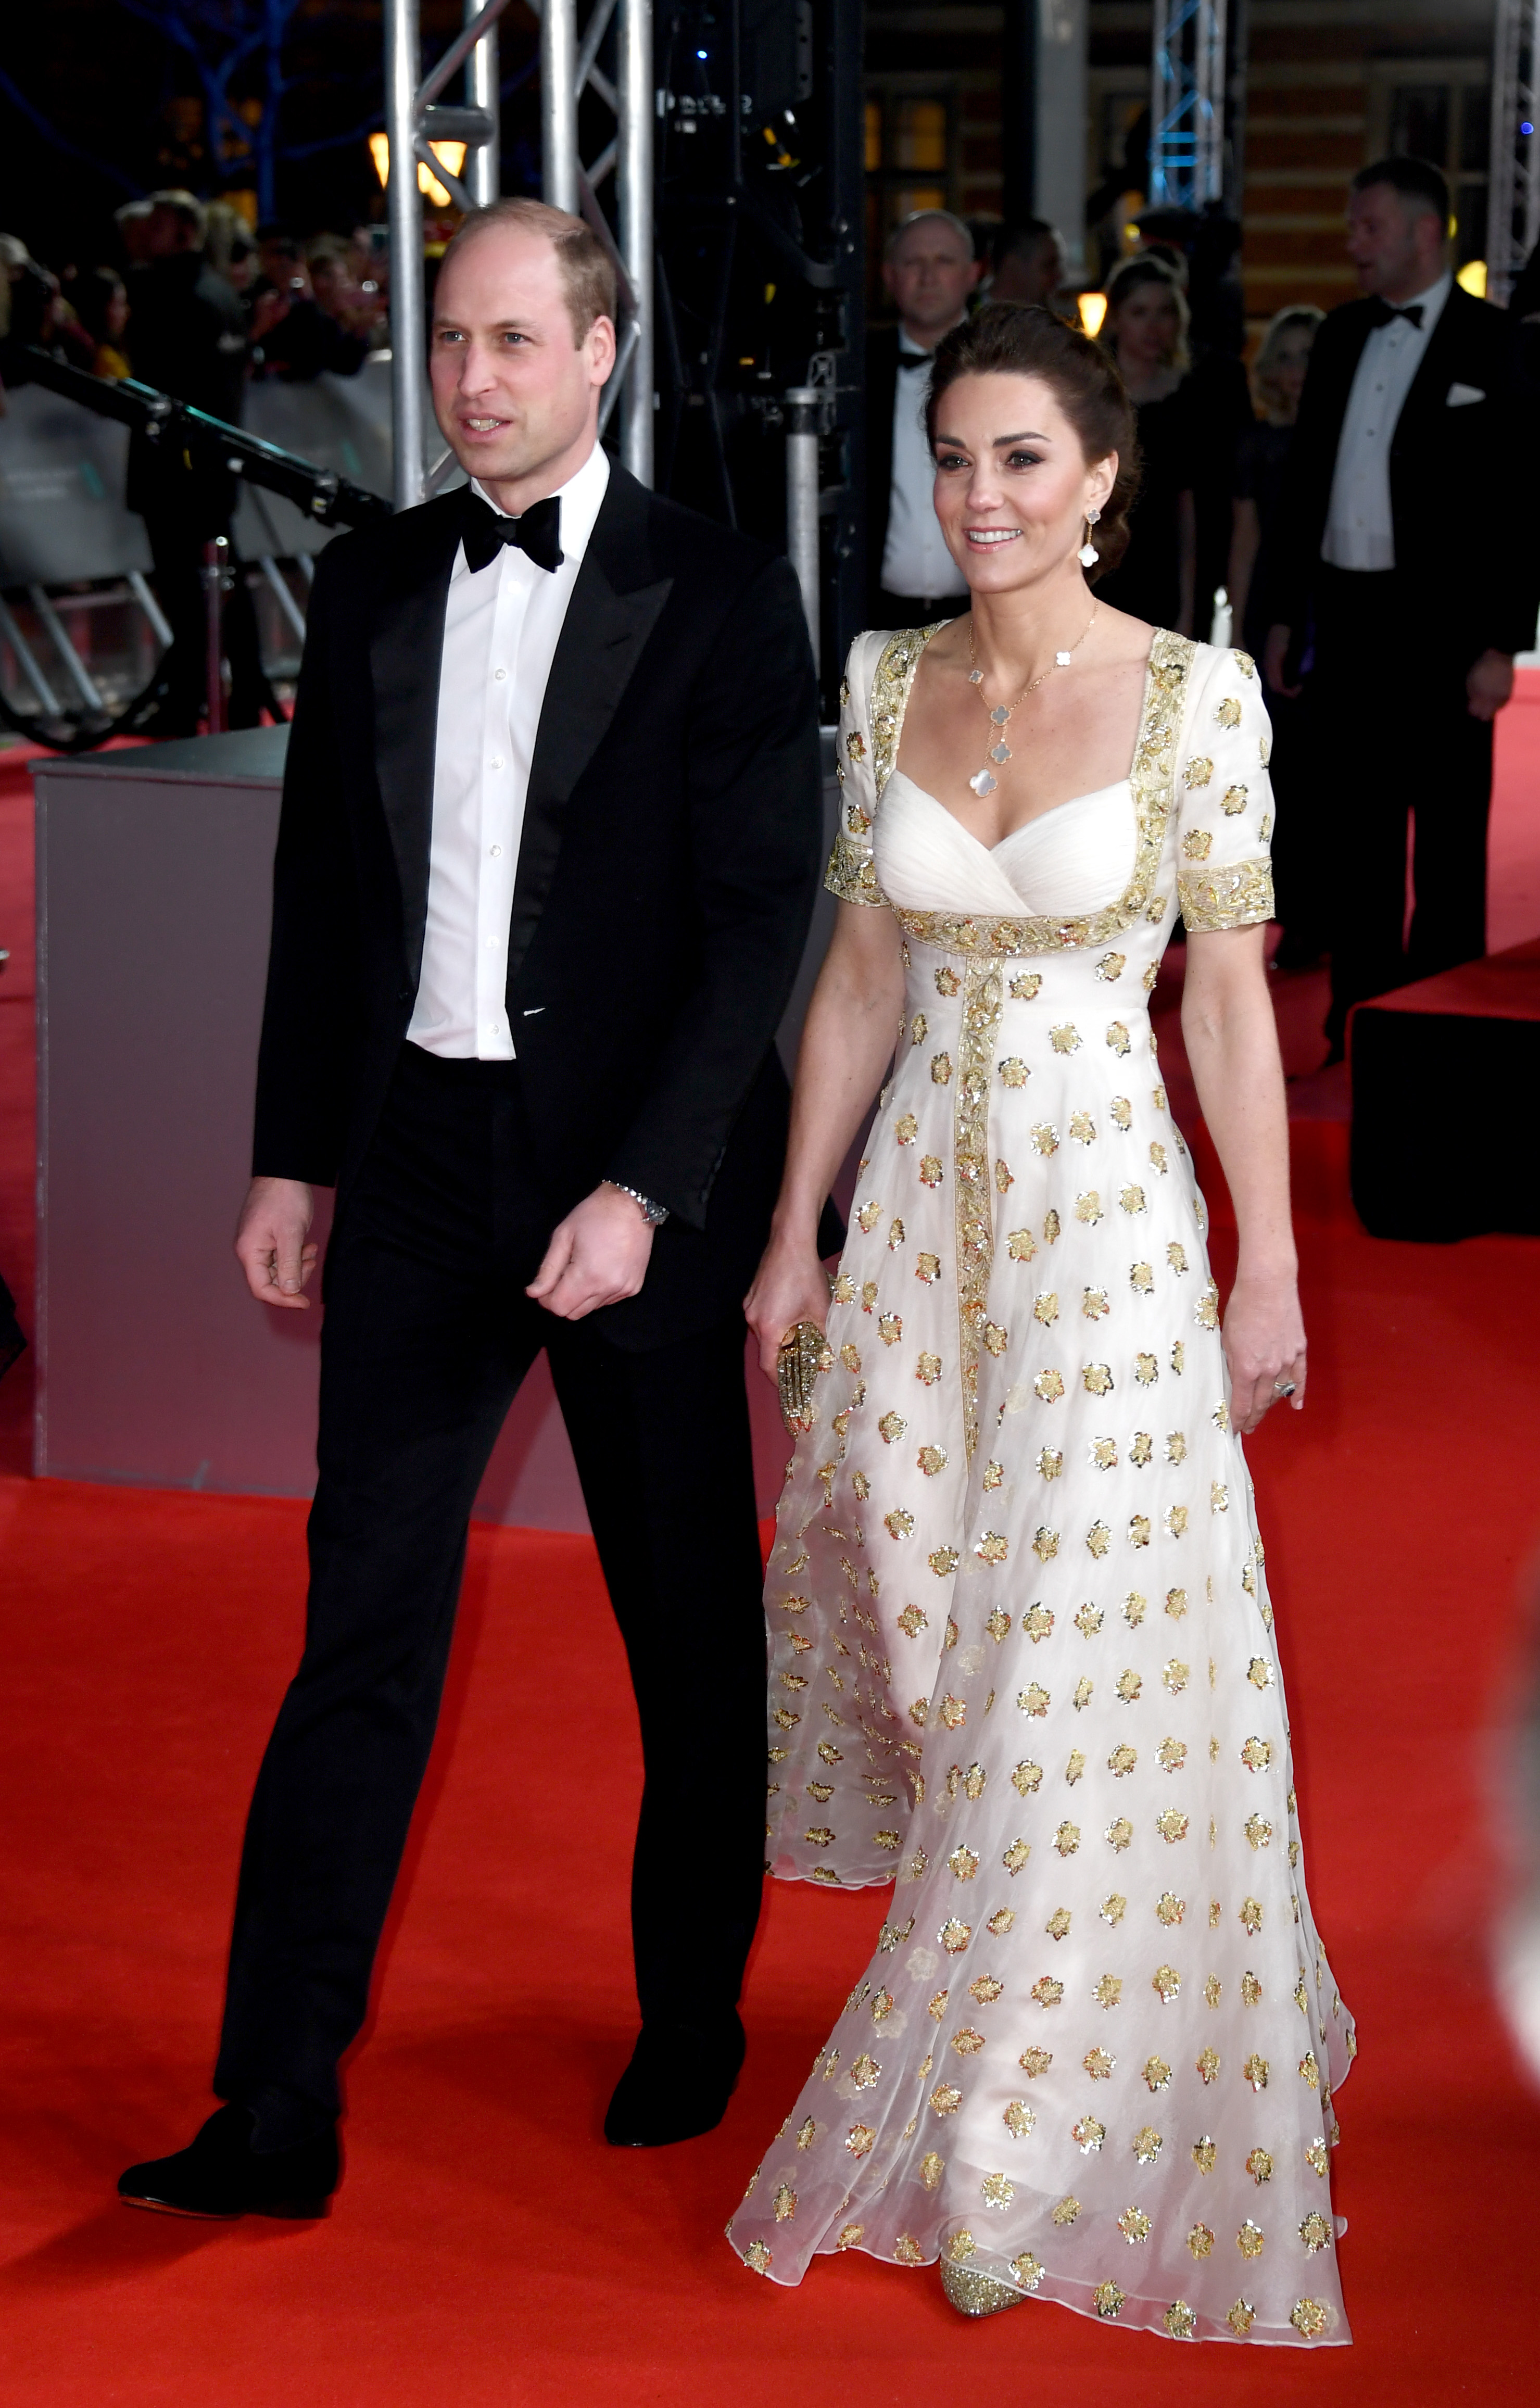 Duchess Catherine and Prince William Attend BAFTA Awards